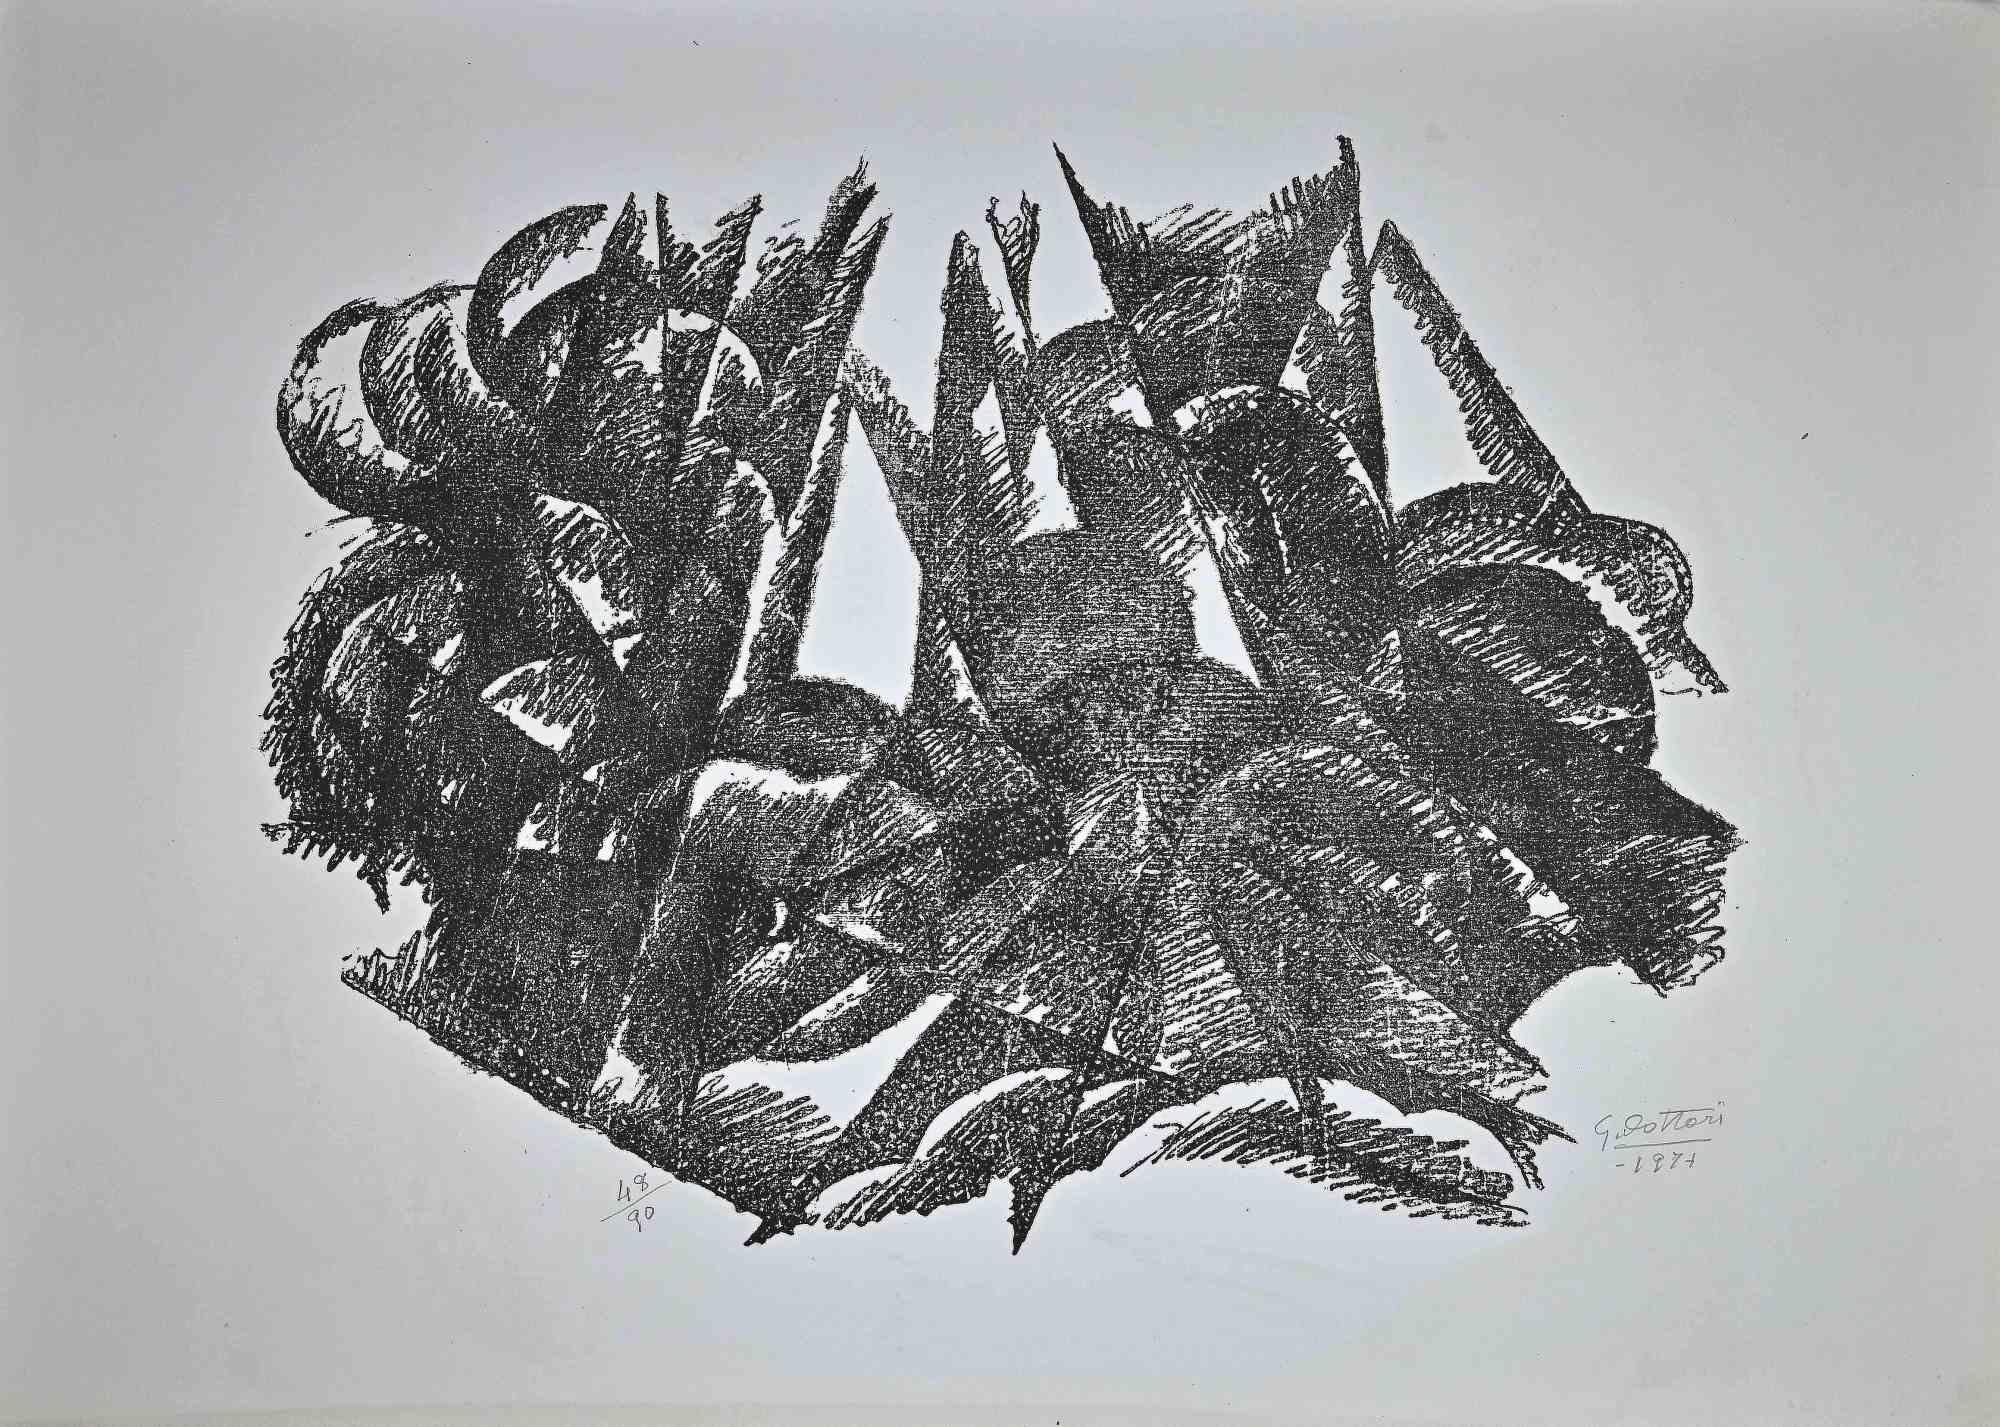 Composition is an original Contemporary Artwork realized in 1971 by Gerardo Dottori (Perugia, 1884 – Perugia, 1977).

Original B/W Lithgraph on paper.

Hand-signed and dated in pencil by the artist on the lower right corner: G. Dottori, 1971.